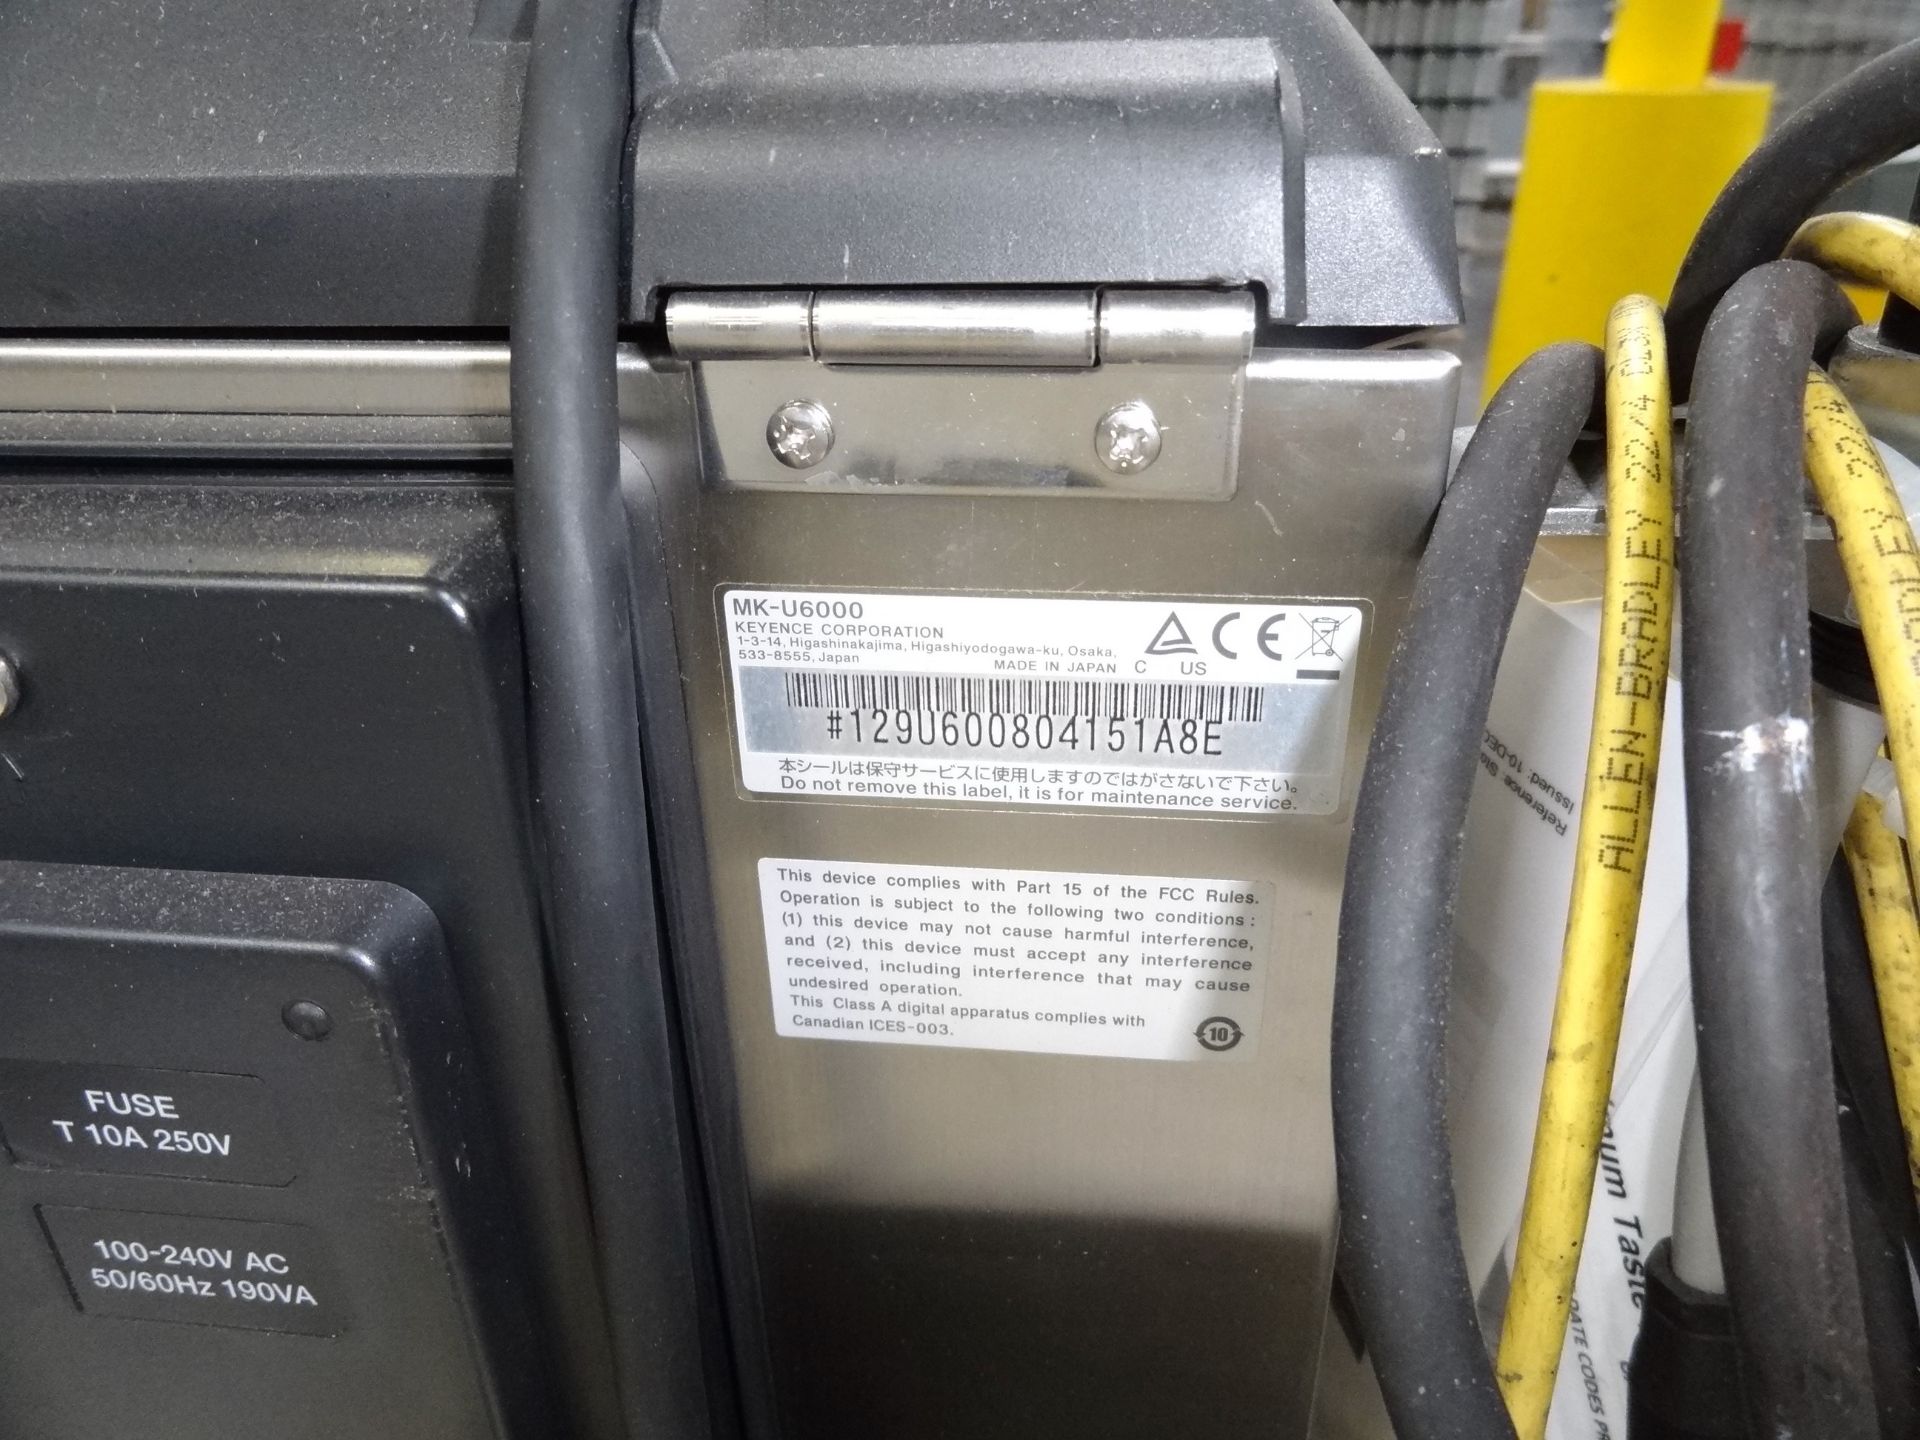 Keyence MK-U6000 Inkjet Code, S/N: AS9U600804151A8E | Rig Fee: $100 - Image 2 of 2